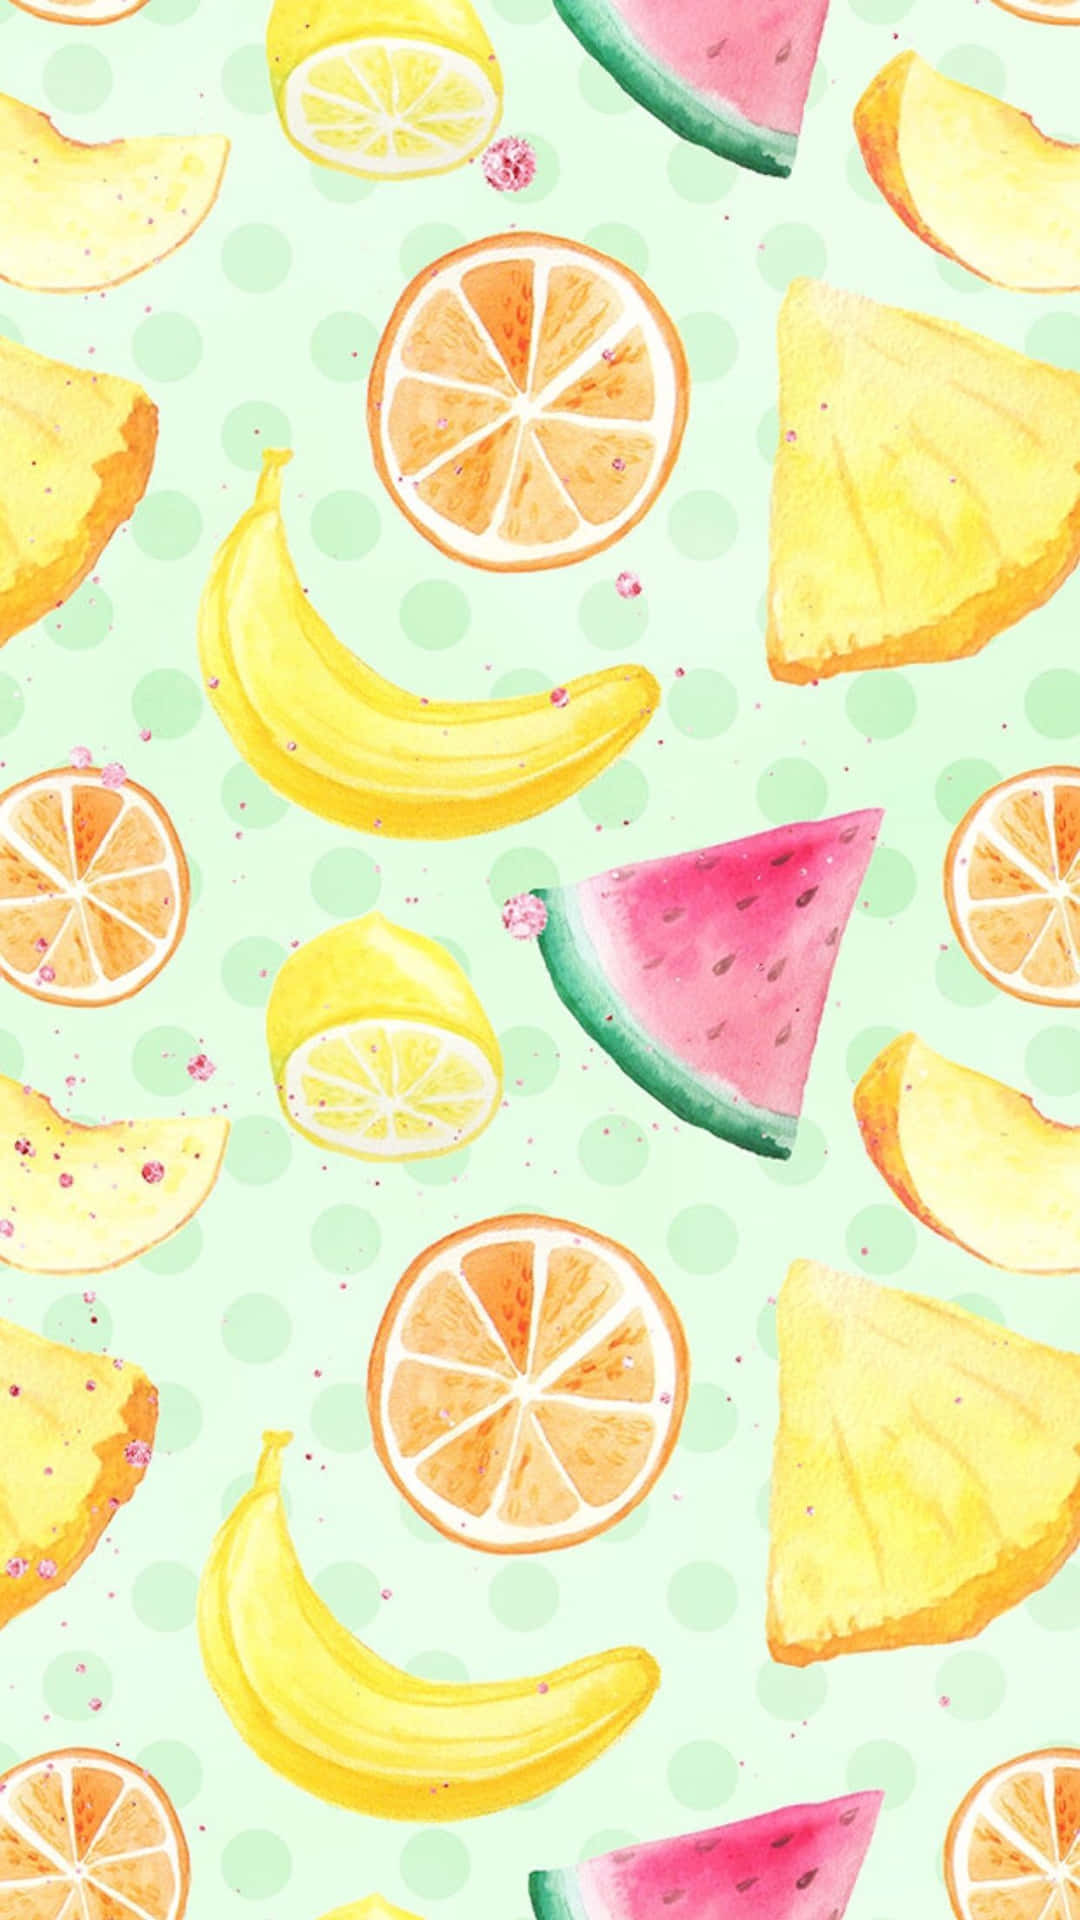 Get Ready To Enjoy Delicious Food With The New Cute Food iPhone Wallpaper